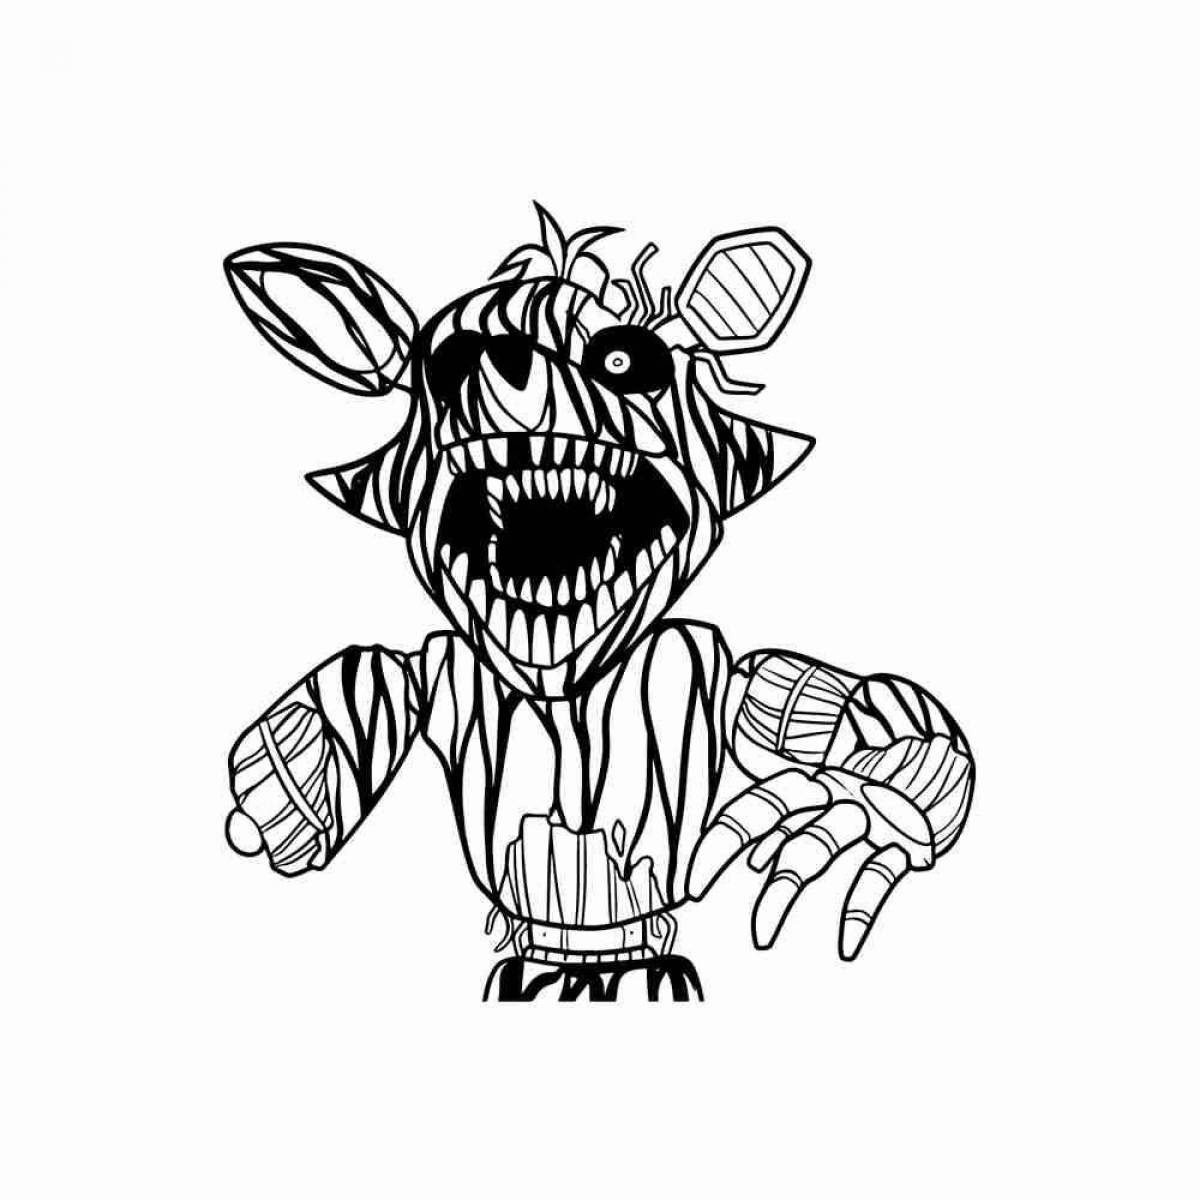 Unwanted freddy nightmare coloring page